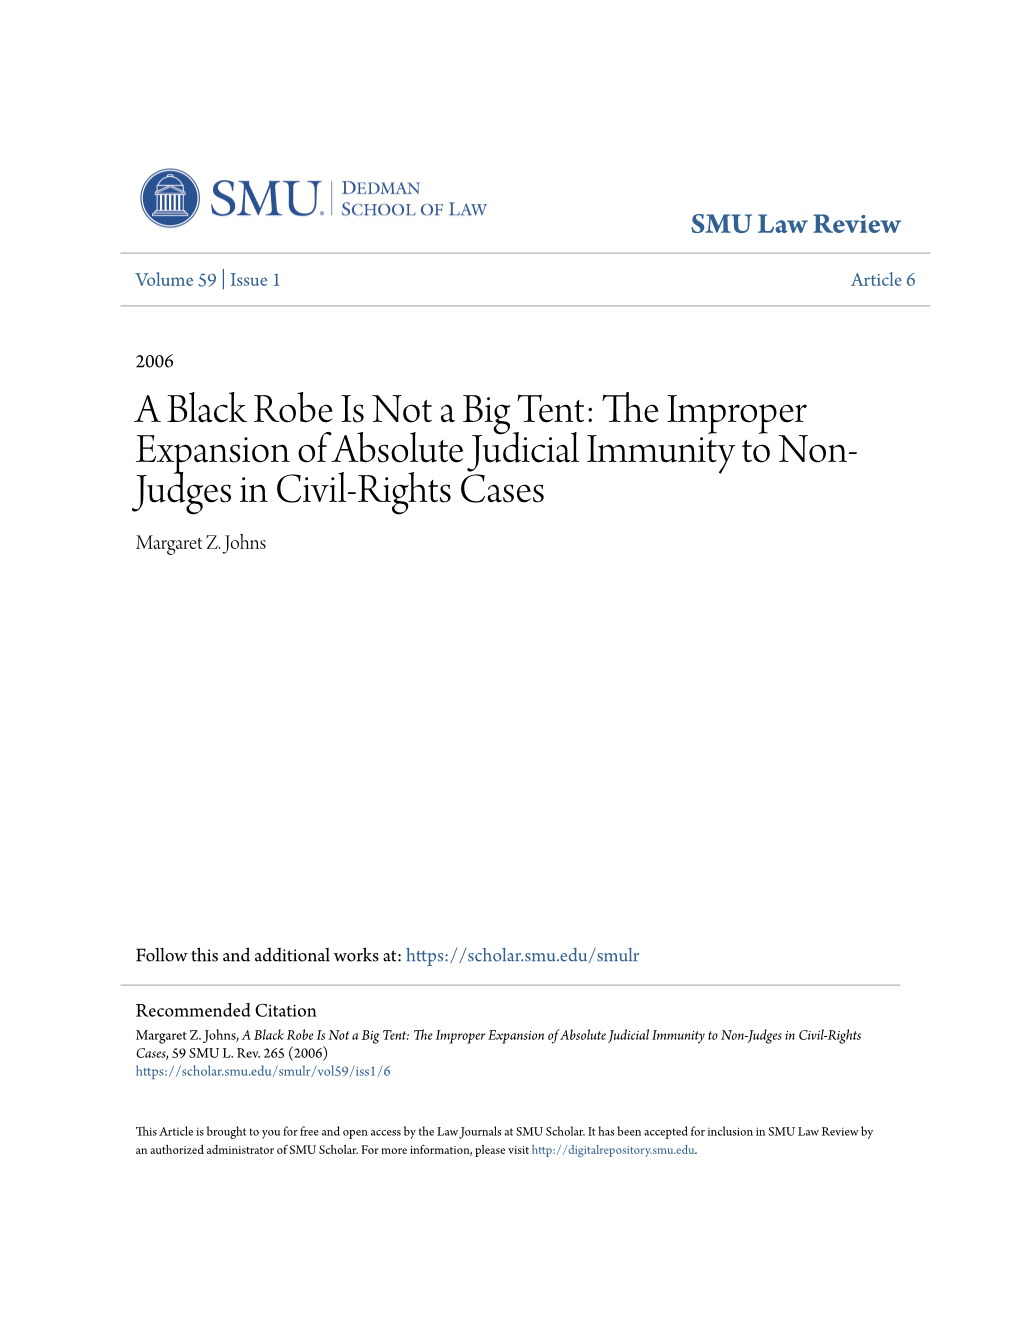 The Improper Expansion of Absolute Judicial Immunity to Non-Judges in Civil-Rights Cases, 59 SMU L